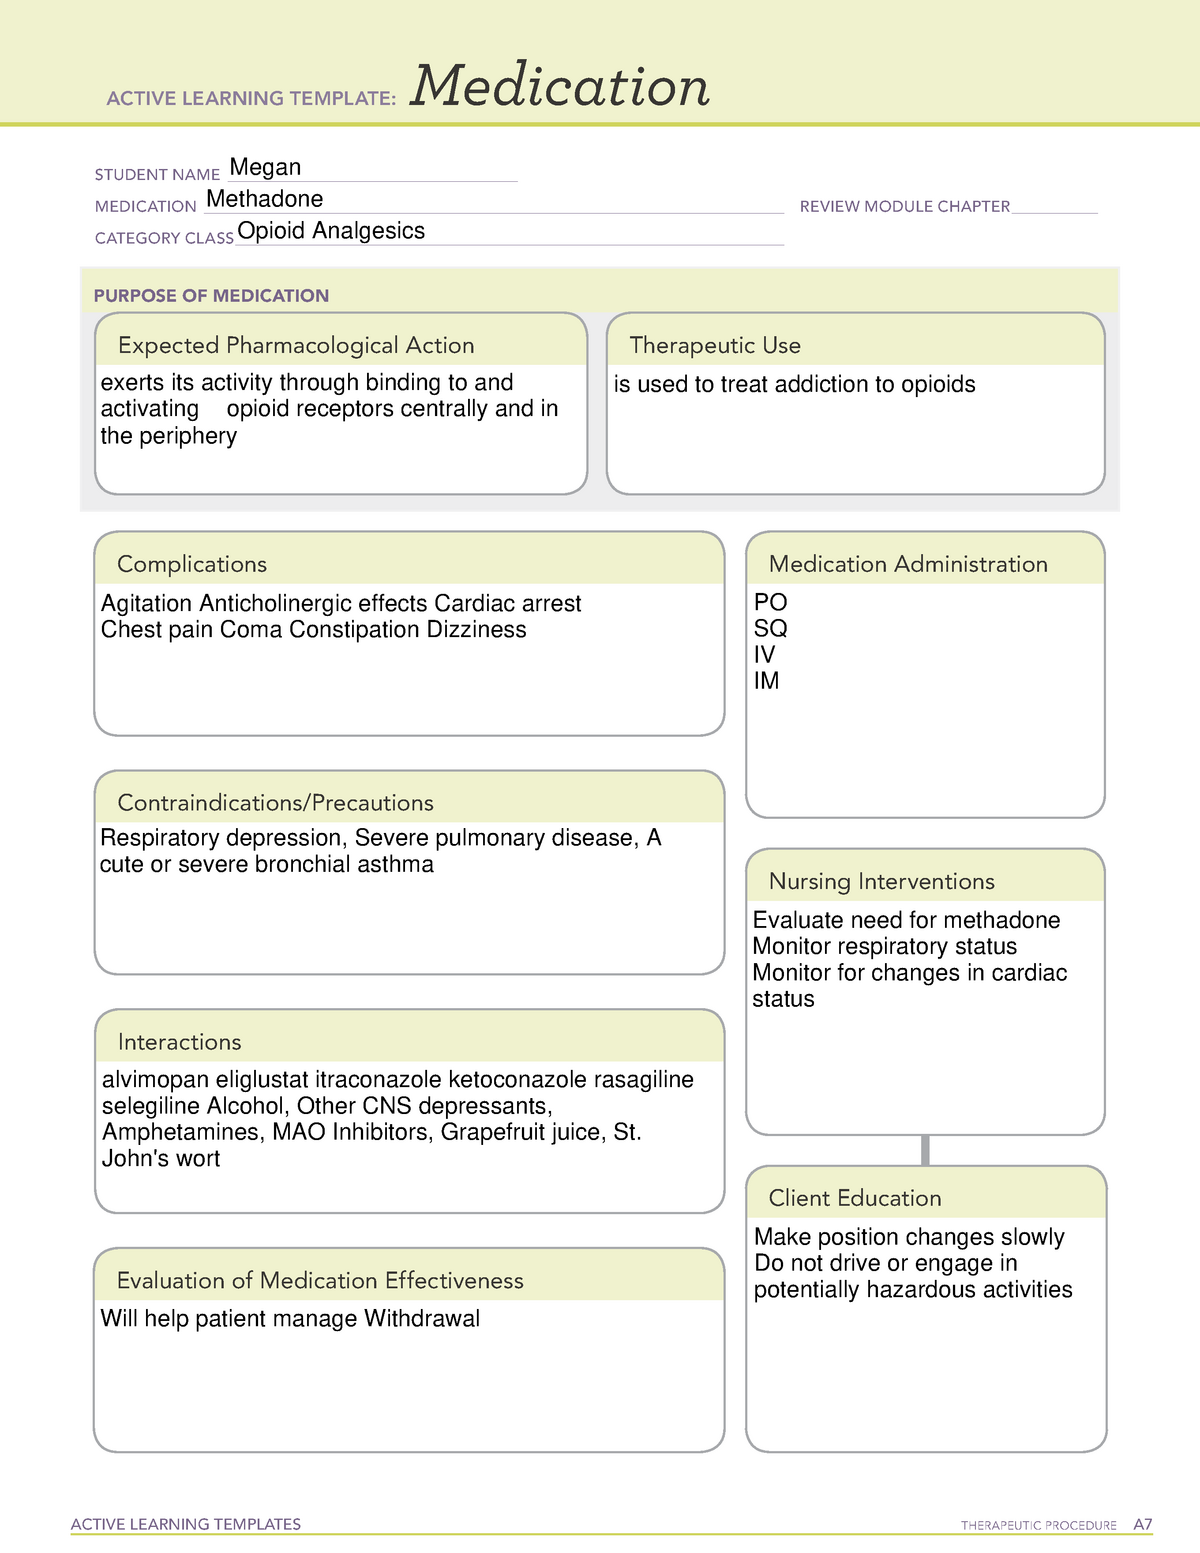 Active Learning Template medication Methadone ACTIVE LEARNING